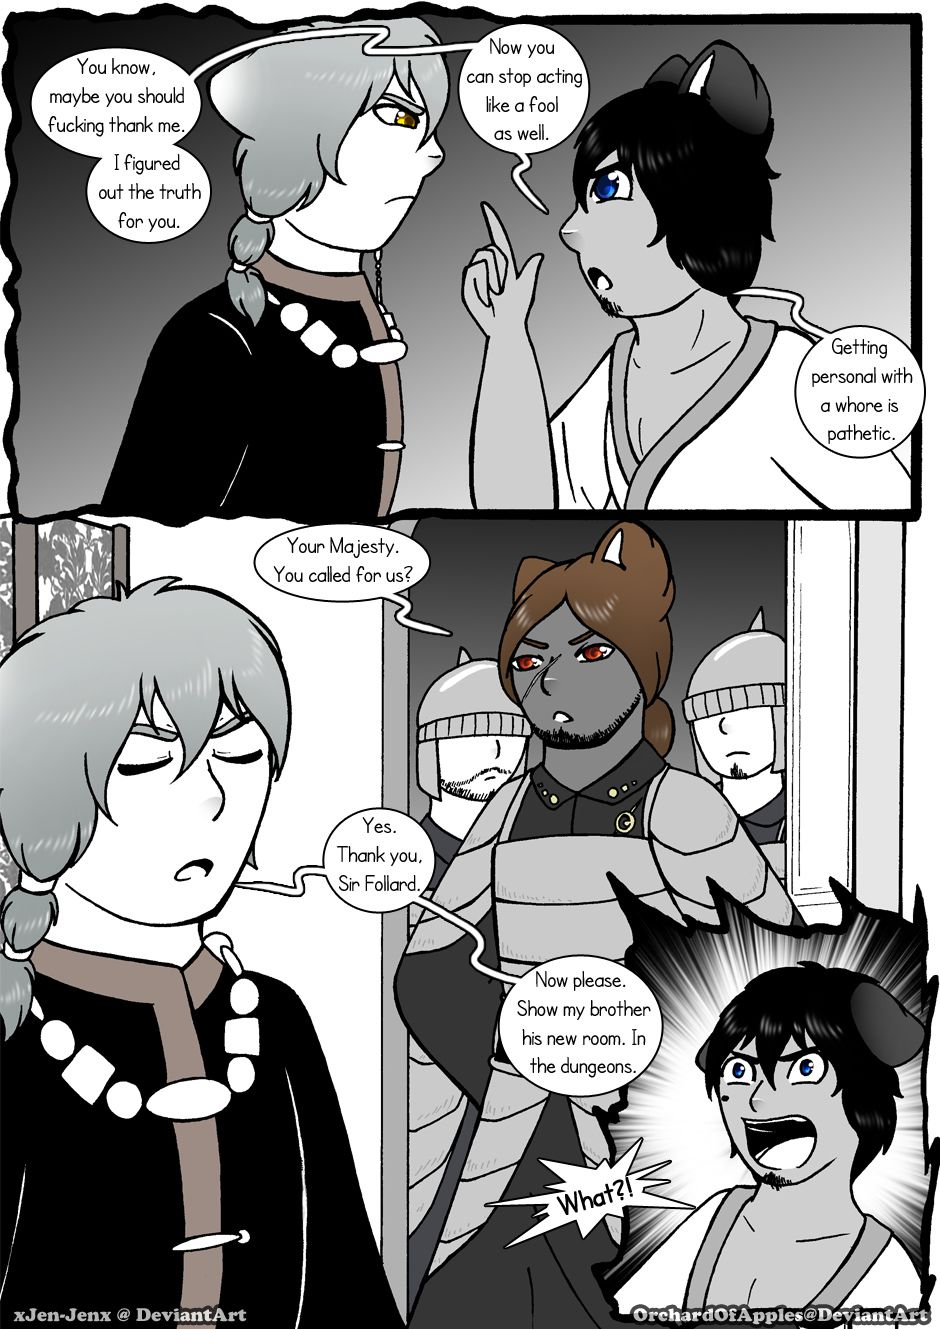 [Jeny-jen94] Between Kings and Queens [Ongoing] 172